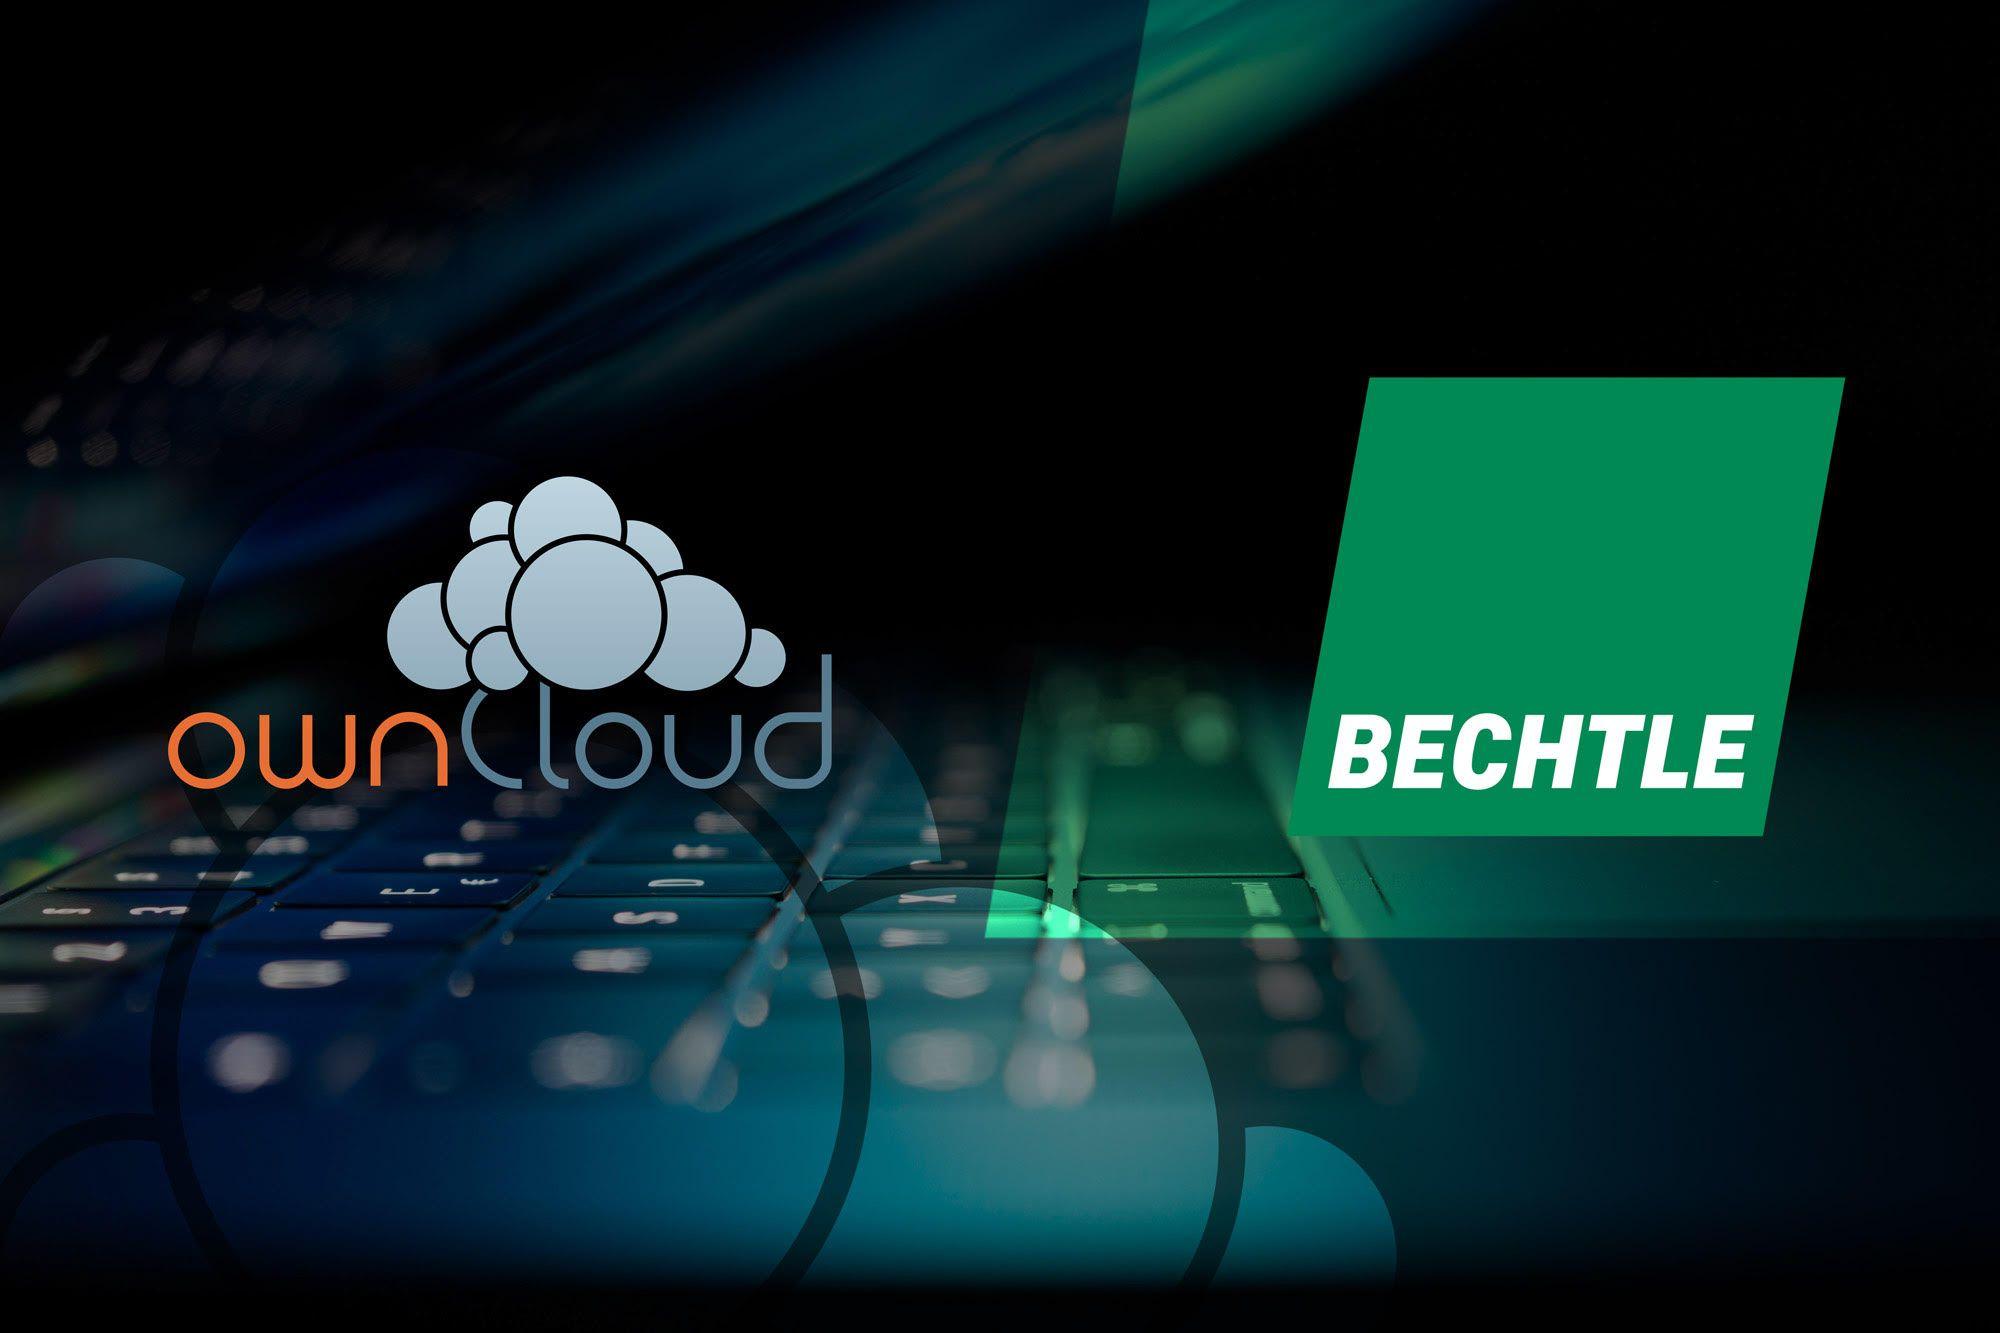 Bechtle Logo - Secure Cloud Collaboration for Small and Medium-sized Businesses ...